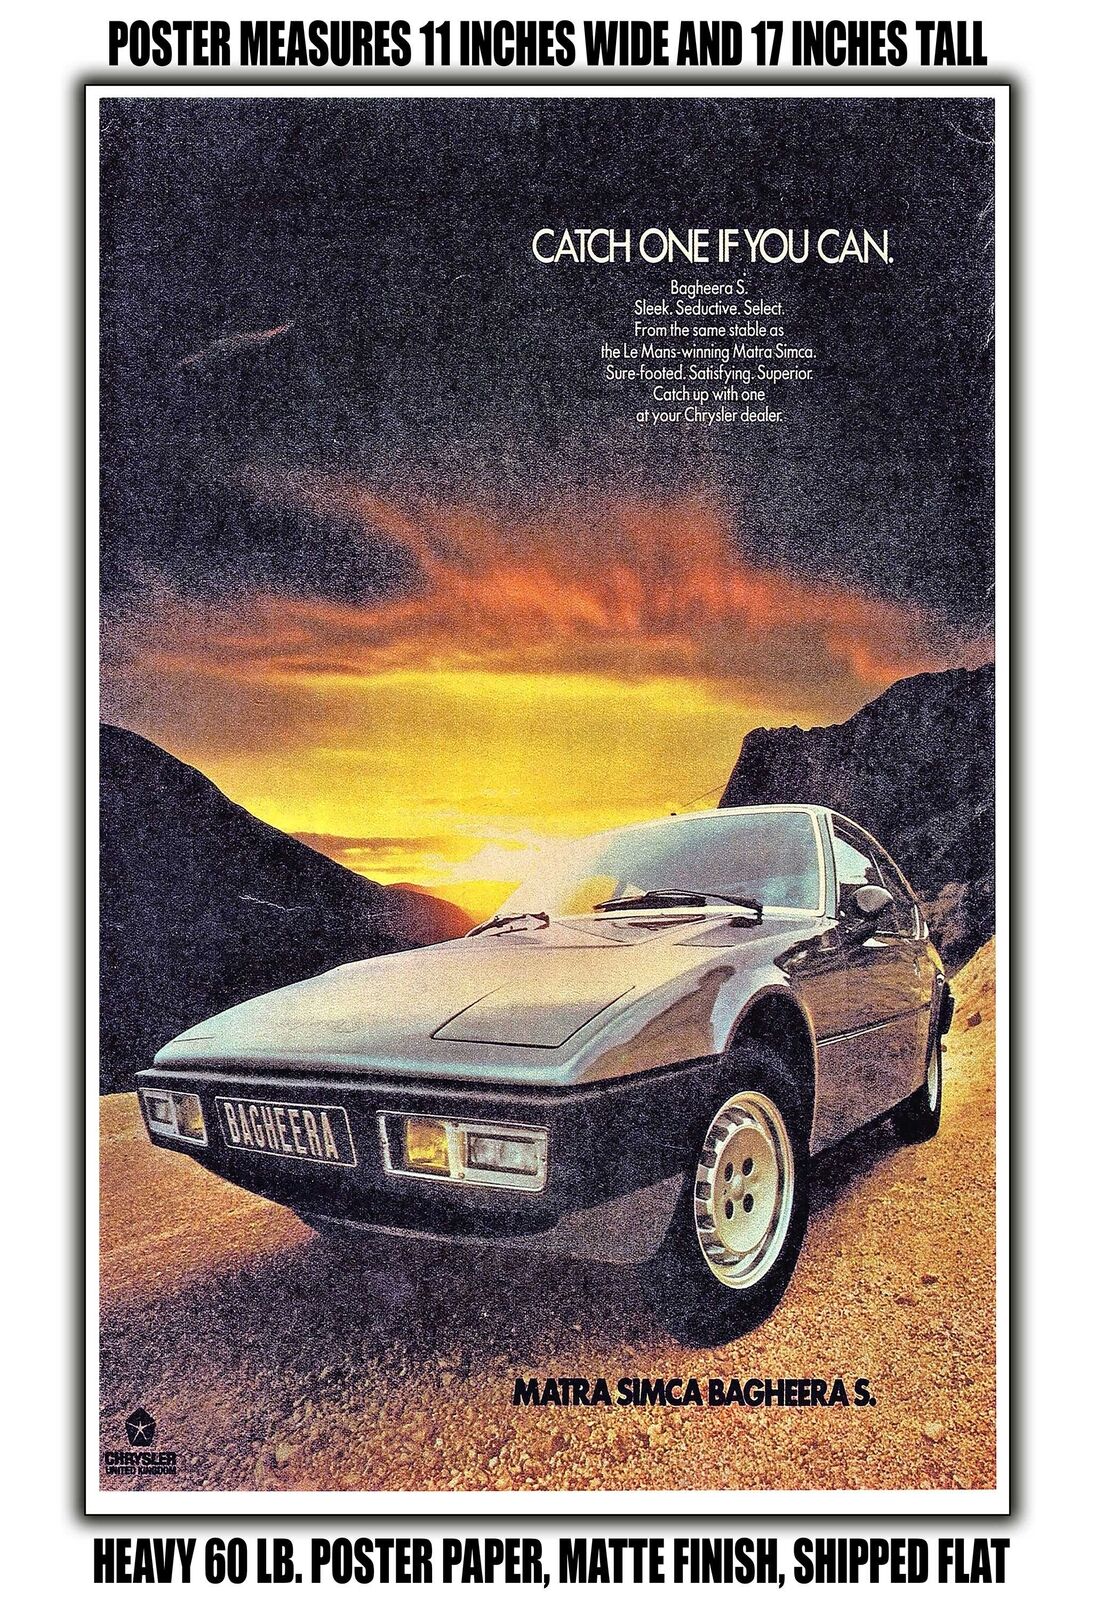 11x17 POSTER - 1977 Matra Simca Bagheera S Catch One If You Can